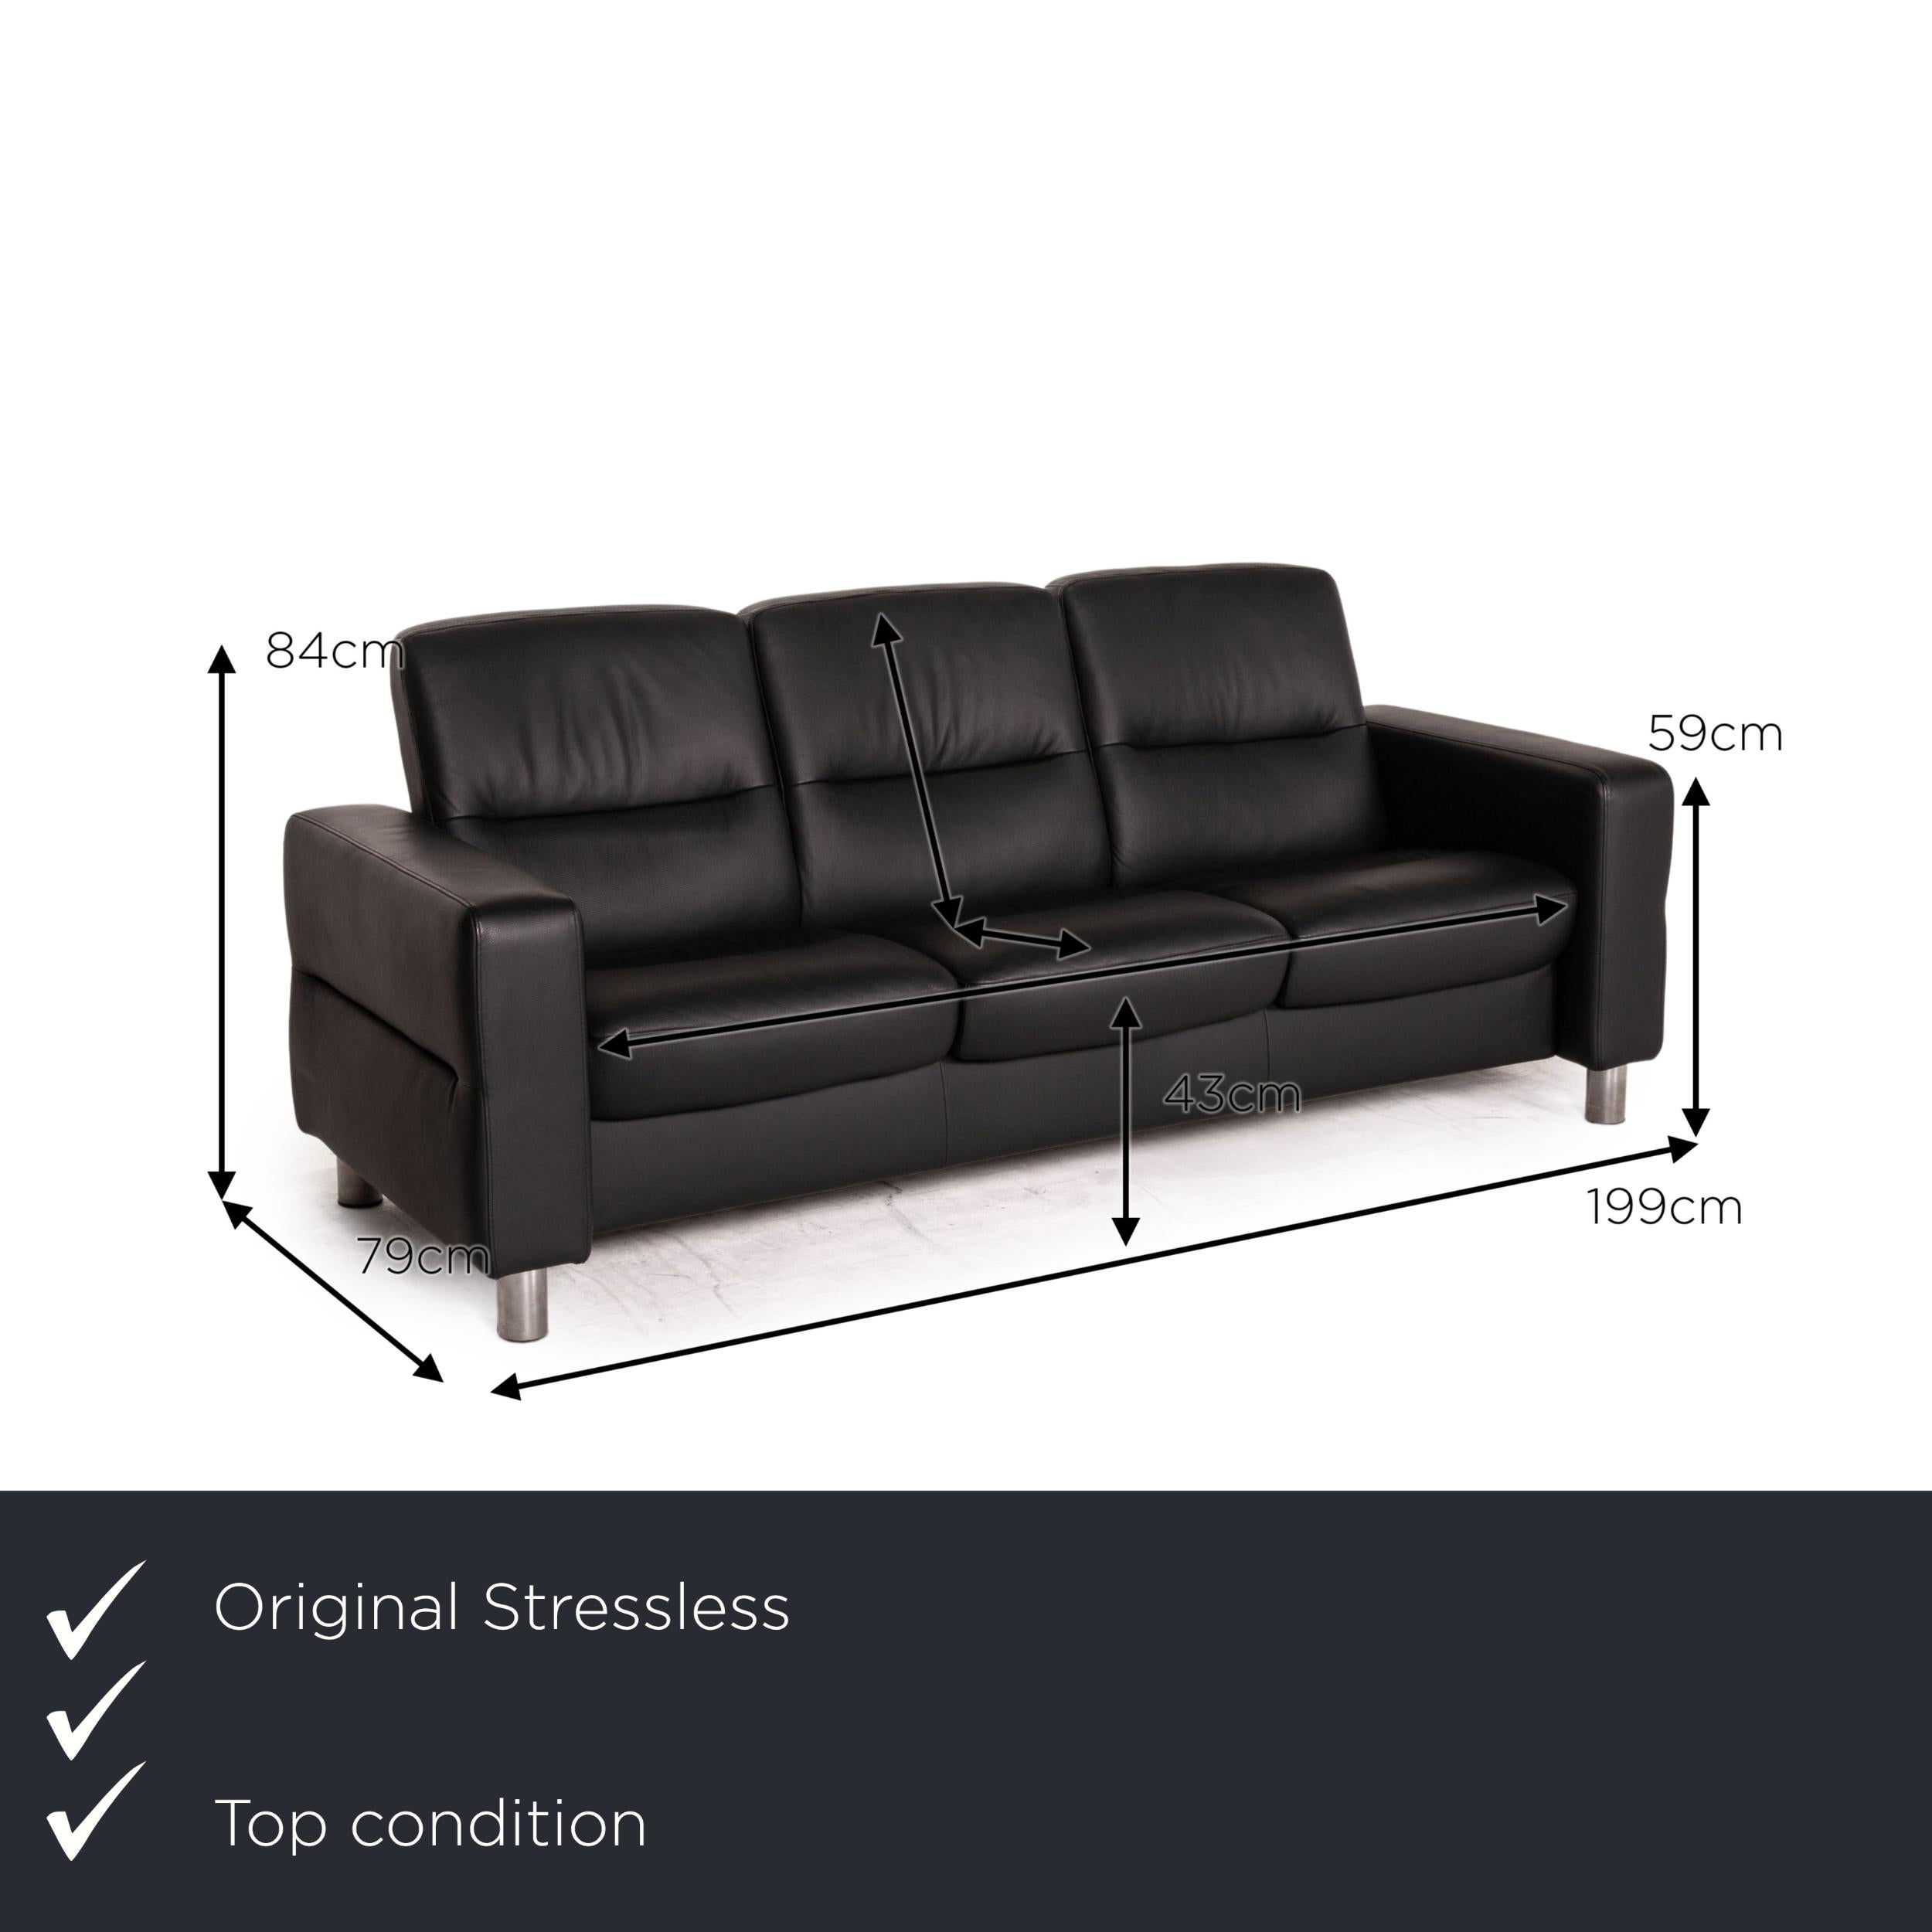 We present to you a Stressless waver three seater leather sofa black couch.

Product measurements in centimeters:

Depth 79
Width 199
Height 84
Seat height 43
Rest height 59
Seat depth 49
Seat width 165
Back height 44.
 
  
 
  